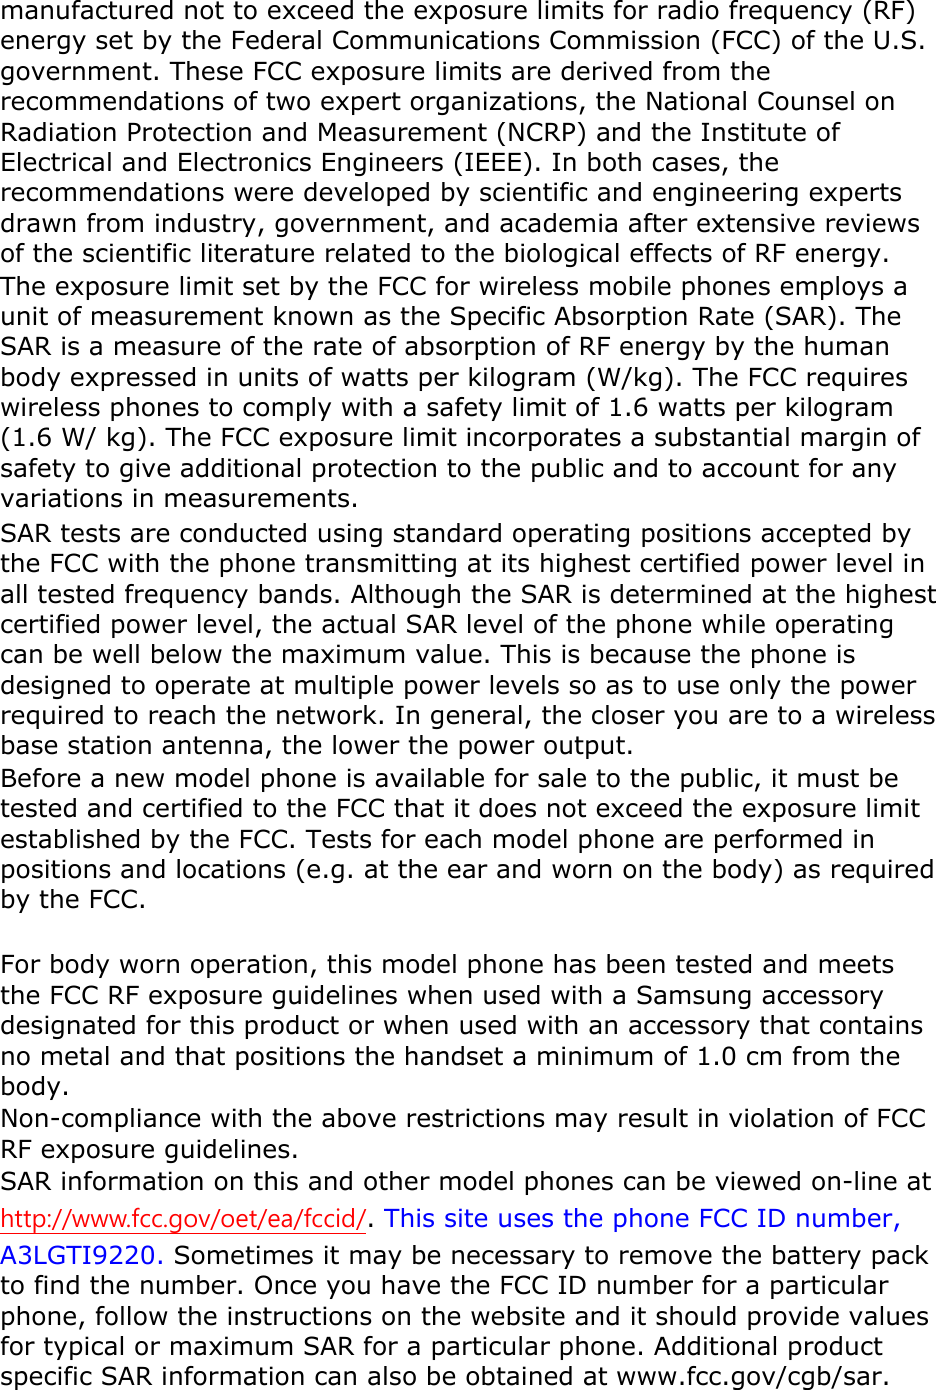 manufactured not to exceed the exposure limits for radio frequency (RF) energy set by the Federal Communications Commission (FCC) of the U.S. government. These FCC exposure limits are derived from the recommendations of two expert organizations, the National Counsel on Radiation Protection and Measurement (NCRP) and the Institute of Electrical and Electronics Engineers (IEEE). In both cases, the recommendations were developed by scientific and engineering experts drawn from industry, government, and academia after extensive reviews of the scientific literature related to the biological effects of RF energy. The exposure limit set by the FCC for wireless mobile phones employs a unit of measurement known as the Specific Absorption Rate (SAR). The SAR is a measure of the rate of absorption of RF energy by the human body expressed in units of watts per kilogram (W/kg). The FCC requires wireless phones to comply with a safety limit of 1.6 watts per kilogram (1.6 W/ kg). The FCC exposure limit incorporates a substantial margin of safety to give additional protection to the public and to account for any variations in measurements. SAR tests are conducted using standard operating positions accepted by the FCC with the phone transmitting at its highest certified power level in all tested frequency bands. Although the SAR is determined at the highest certified power level, the actual SAR level of the phone while operating can be well below the maximum value. This is because the phone is designed to operate at multiple power levels so as to use only the power required to reach the network. In general, the closer you are to a wireless base station antenna, the lower the power output. Before a new model phone is available for sale to the public, it must be tested and certified to the FCC that it does not exceed the exposure limit established by the FCC. Tests for each model phone are performed in positions and locations (e.g. at the ear and worn on the body) as required by the FCC.      For body worn operation, this model phone has been tested and meets the FCC RF exposure guidelines when used with a Samsung accessory designated for this product or when used with an accessory that contains no metal and that positions the handset a minimum of 1.0 cm from the body.   Non-compliance with the above restrictions may result in violation of FCC RF exposure guidelines. SAR information on this and other model phones can be viewed on-line at http://www.fcc.gov/oet/ea/fccid/. This site uses the phone FCC ID number, A3LGTI9220. Sometimes it may be necessary to remove the battery pack to find the number. Once you have the FCC ID number for a particular phone, follow the instructions on the website and it should provide values for typical or maximum SAR for a particular phone. Additional product specific SAR information can also be obtained at www.fcc.gov/cgb/sar. 